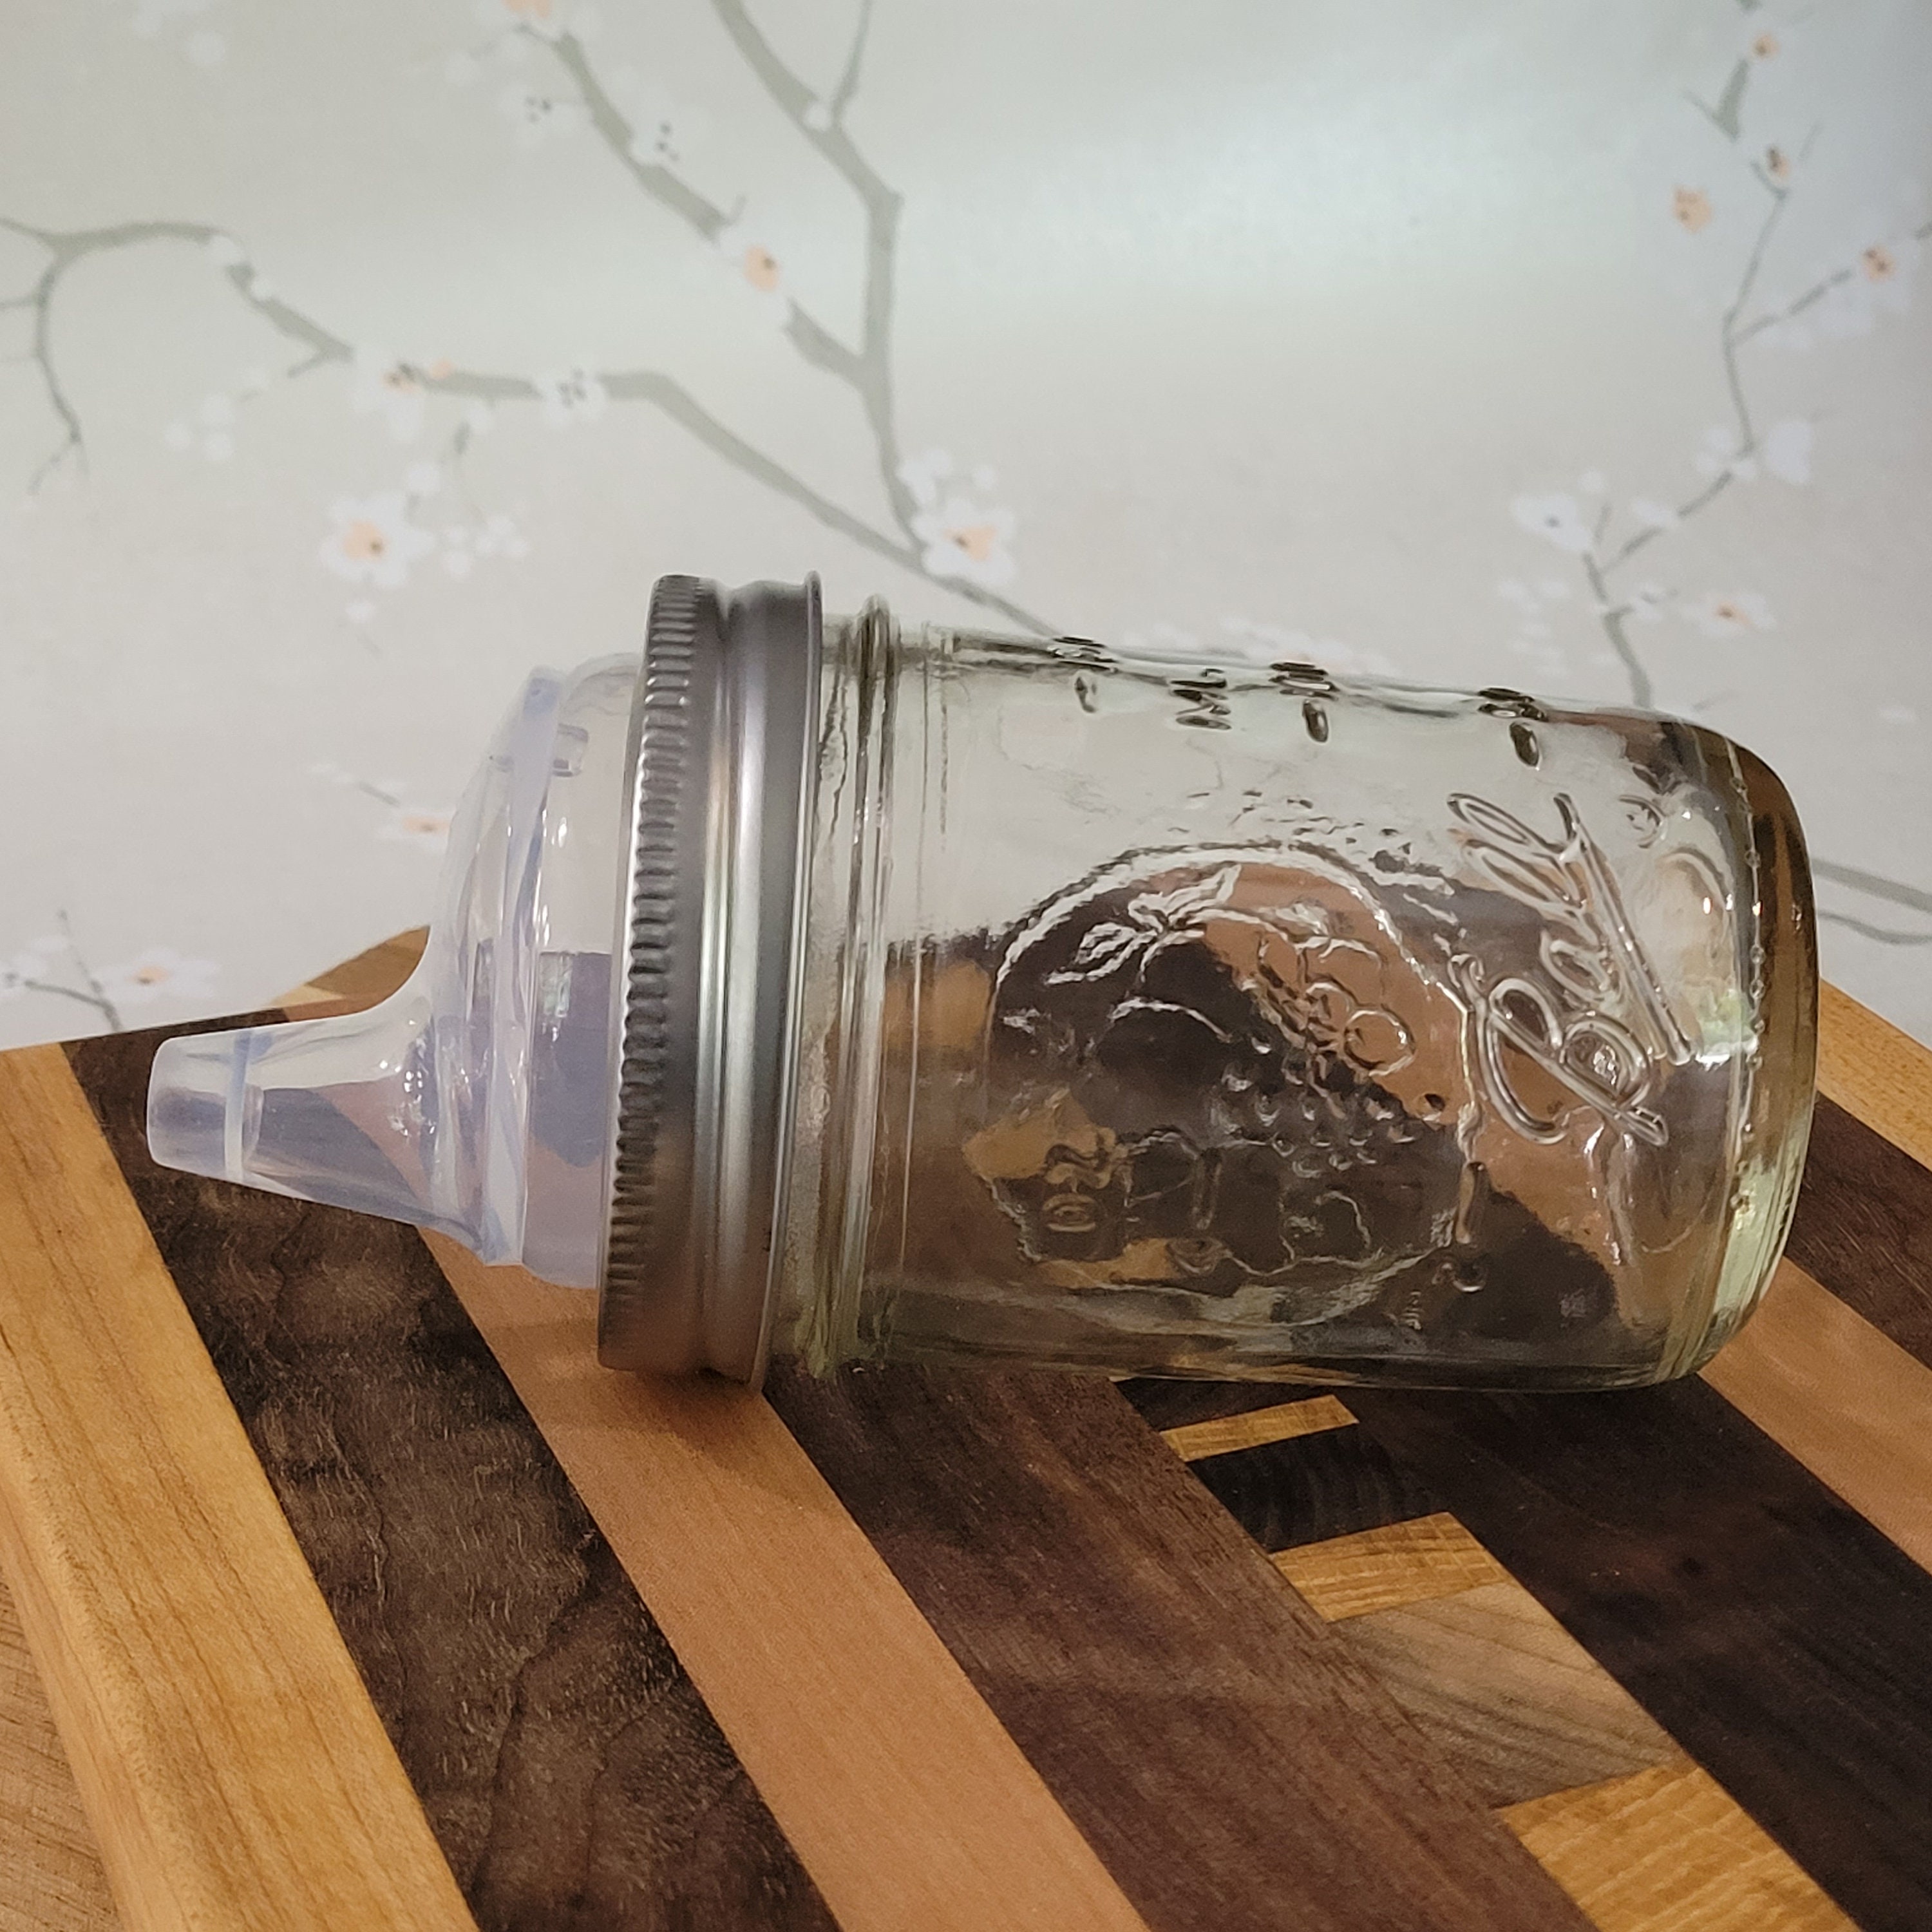 12 oz Mason Glass Jar with your choice of lid - Made in USA